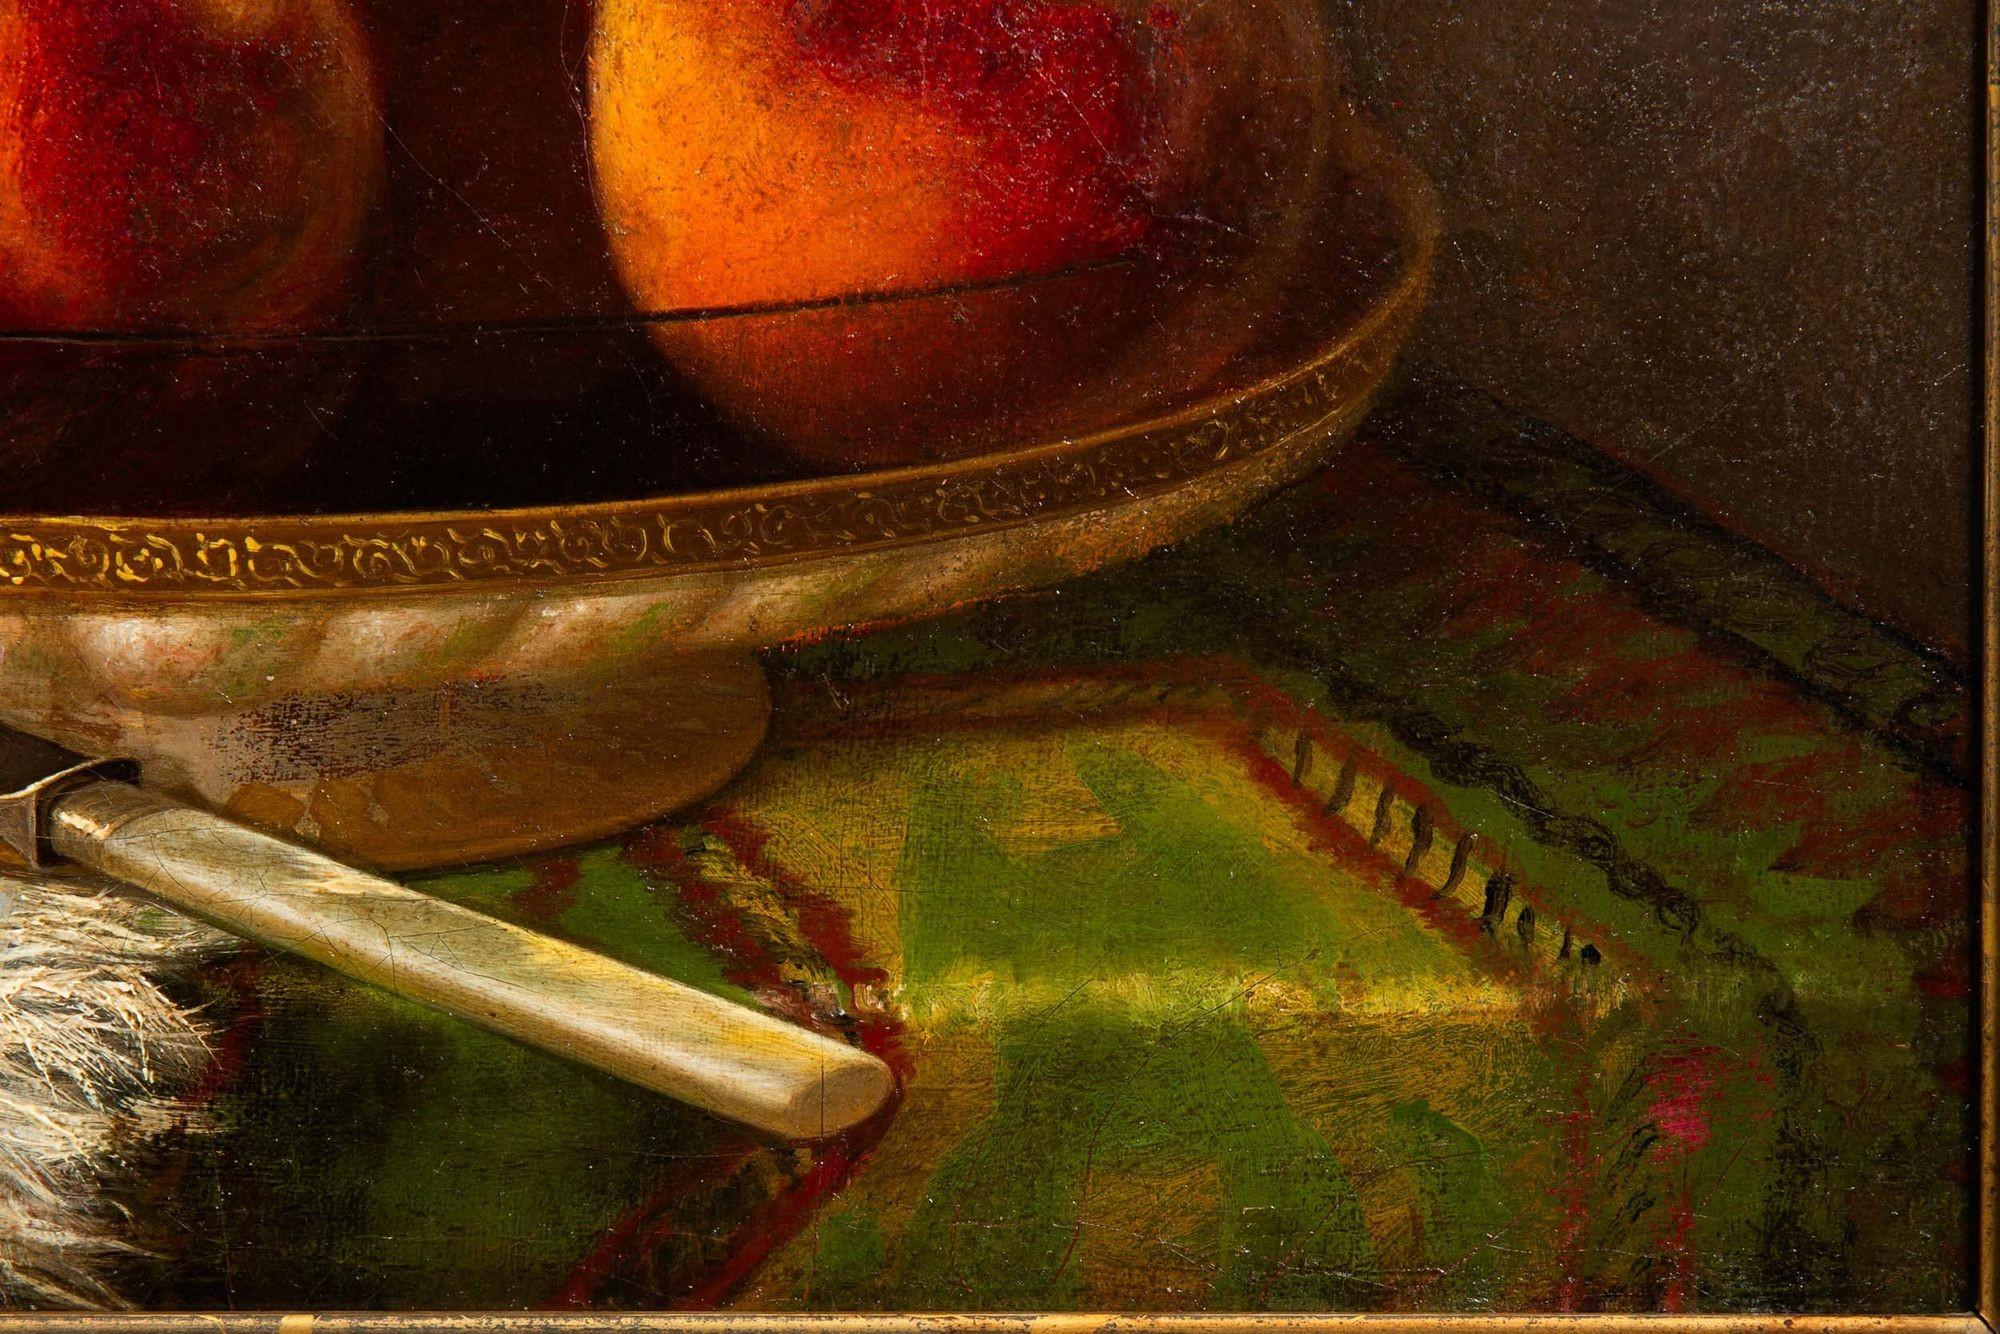 American Still-Life Fruit Painting of Peaches and Fly by Morston Ream ca. 1880 For Sale 1